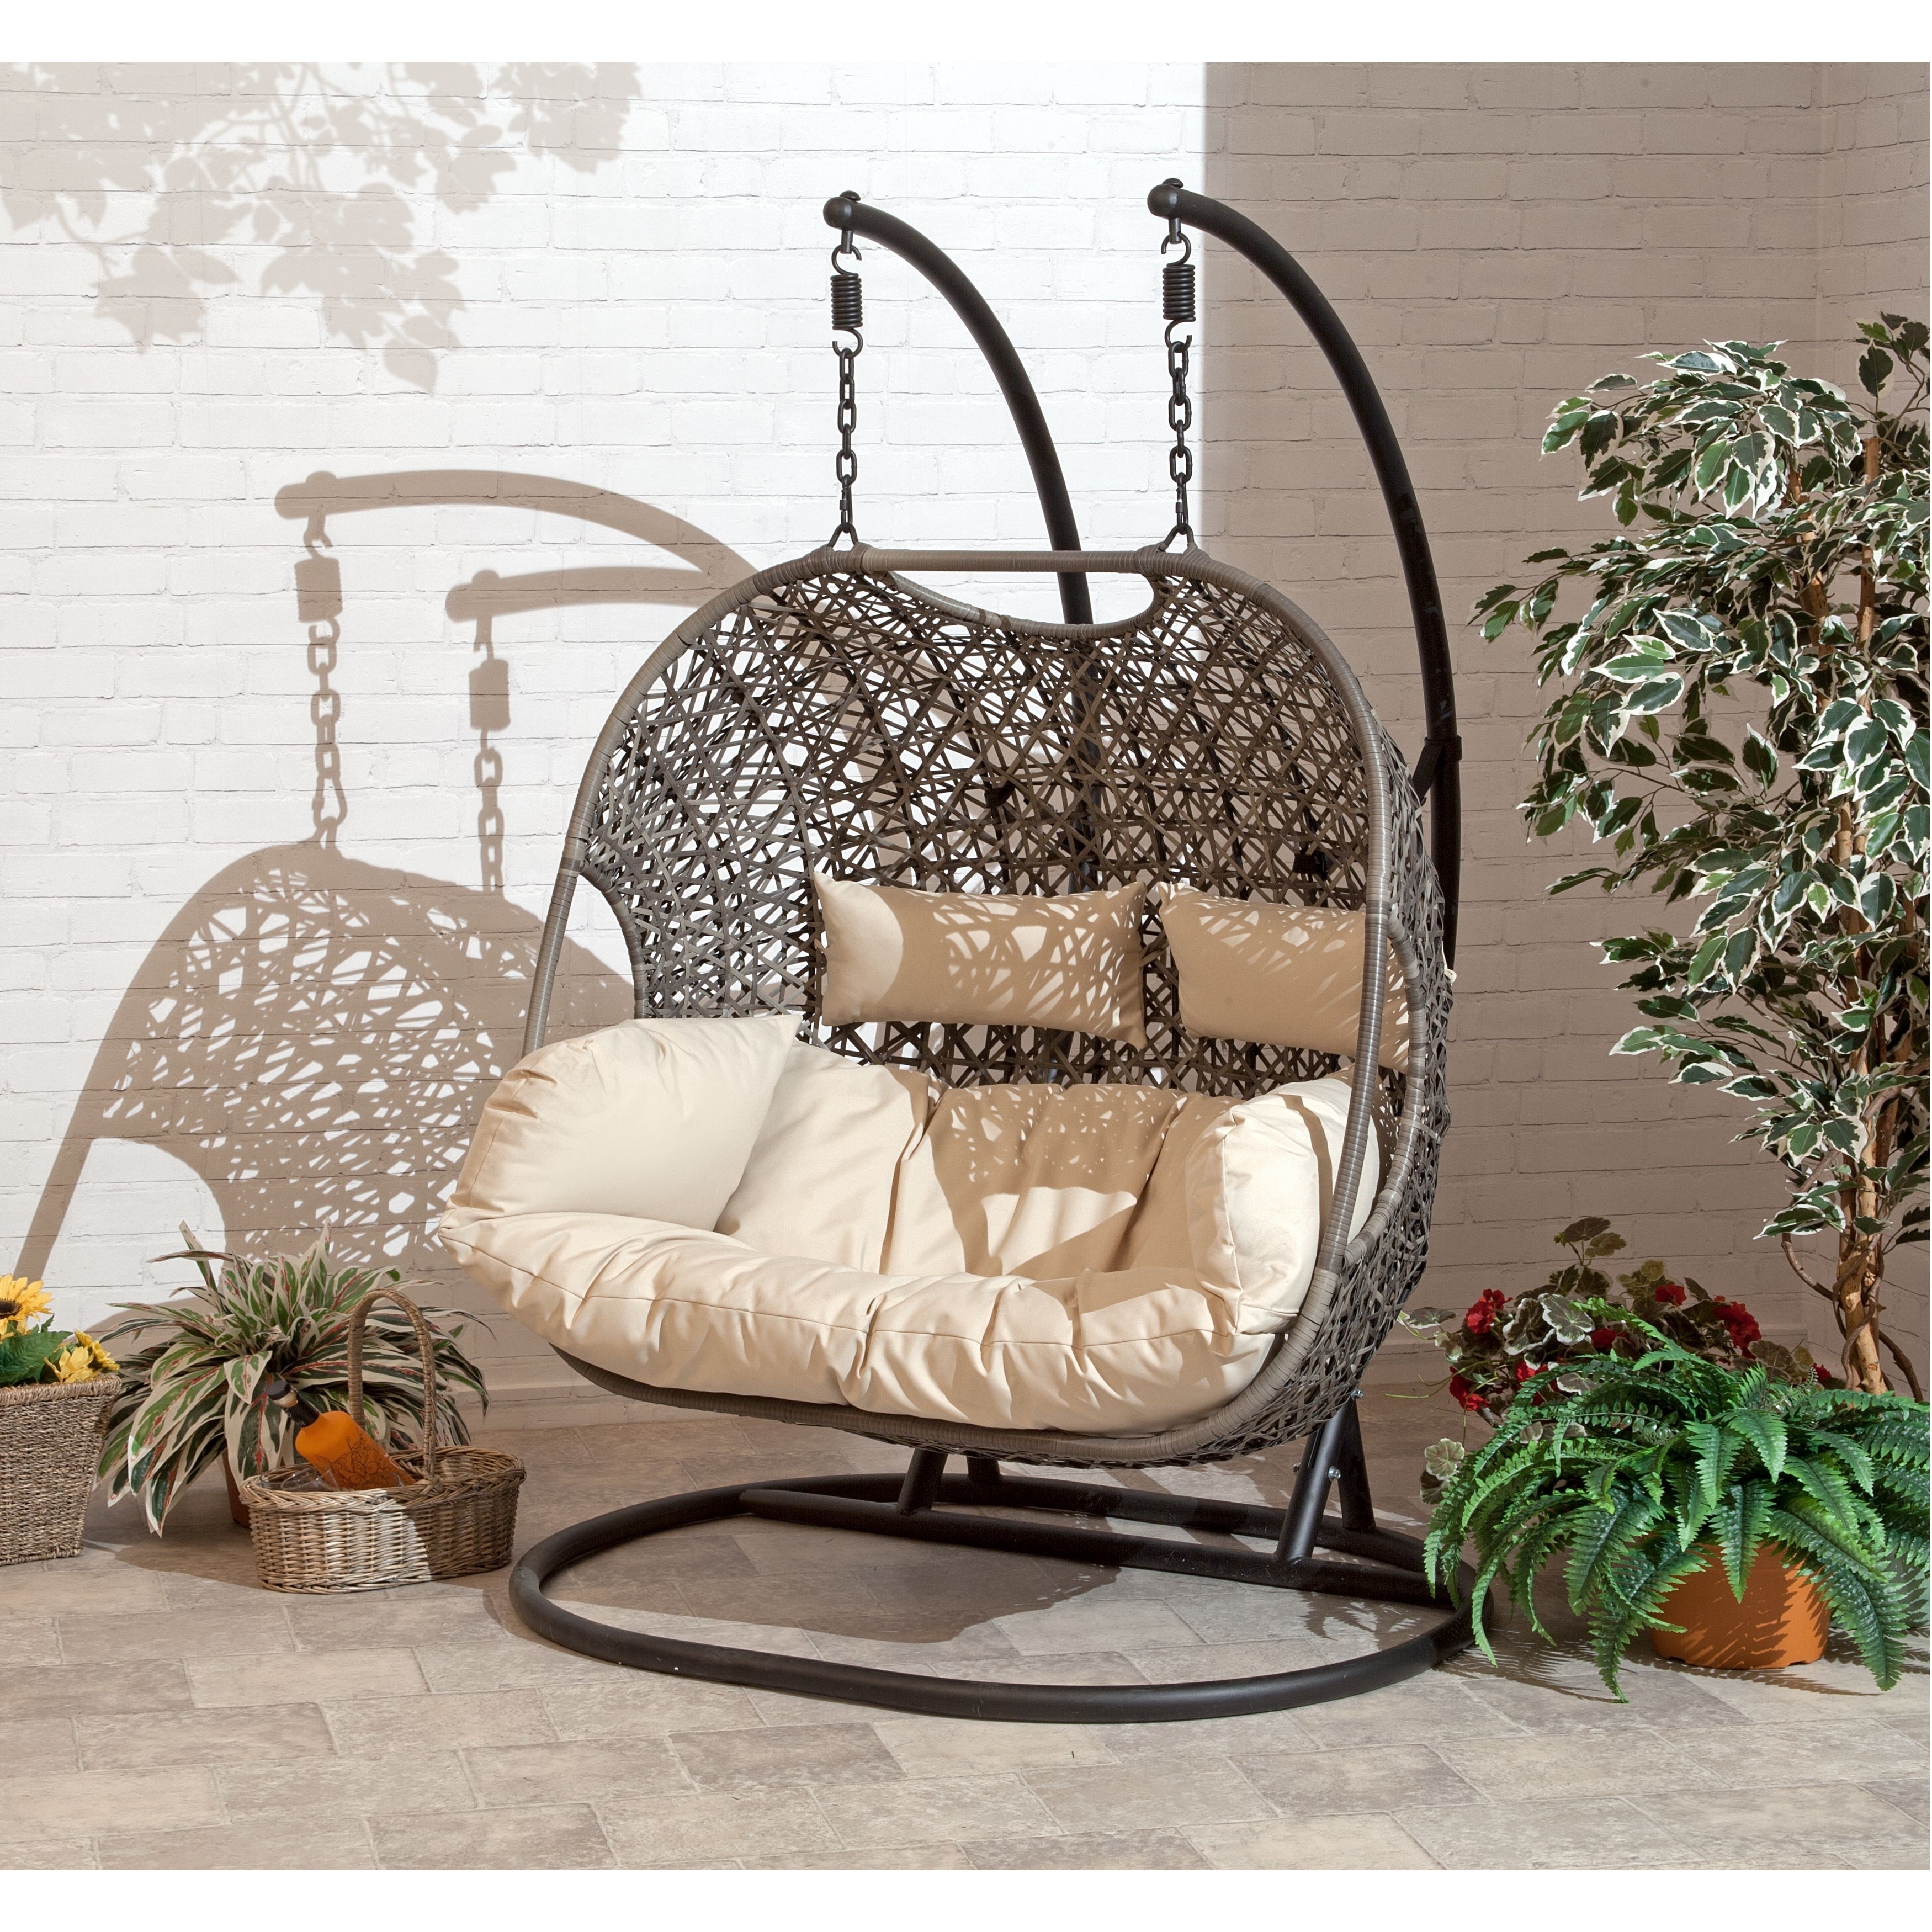 Shop Brampton Espresso Cocoon Hanging Chairswing Double With Beige